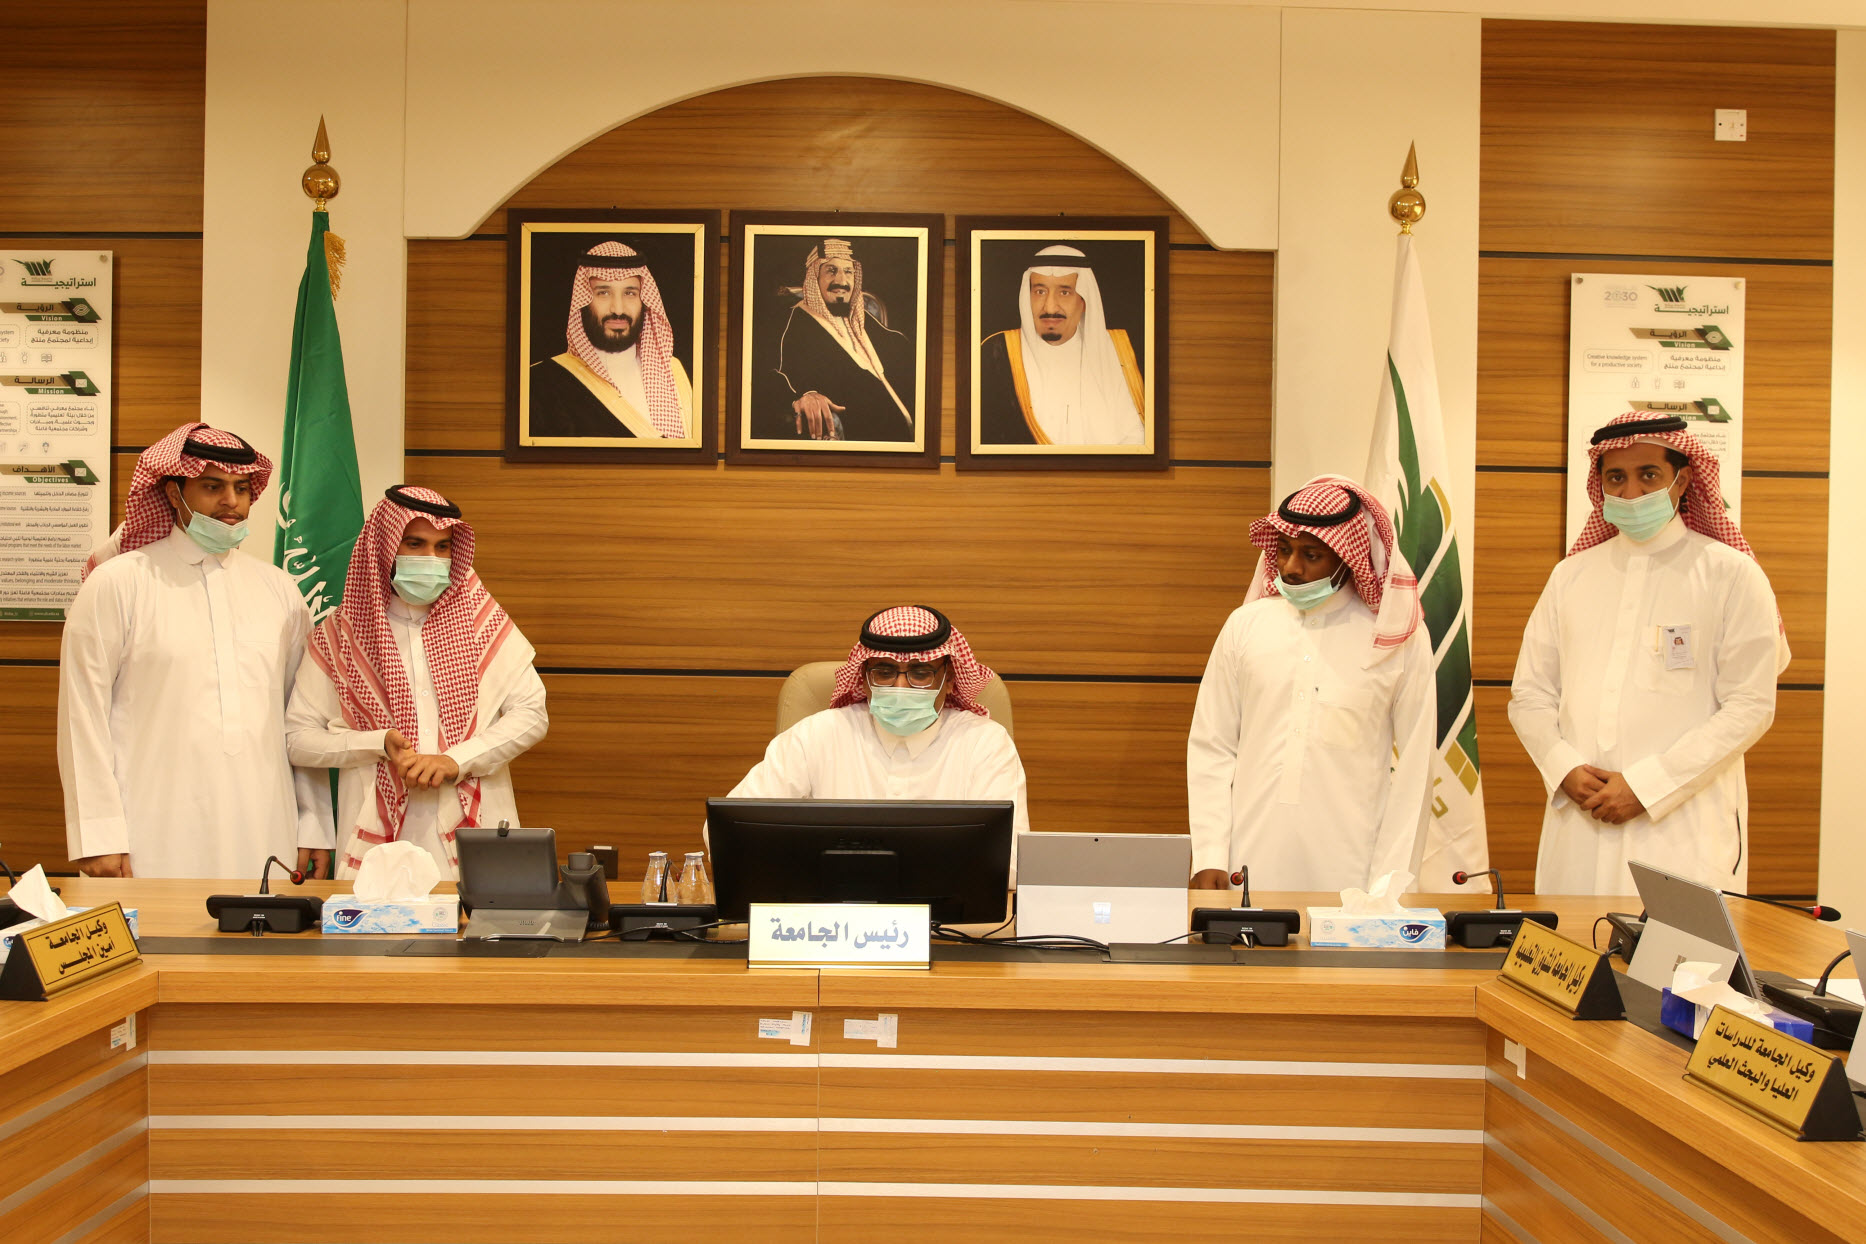 The President of Bisha University inaugurates the new electronic portal of the university